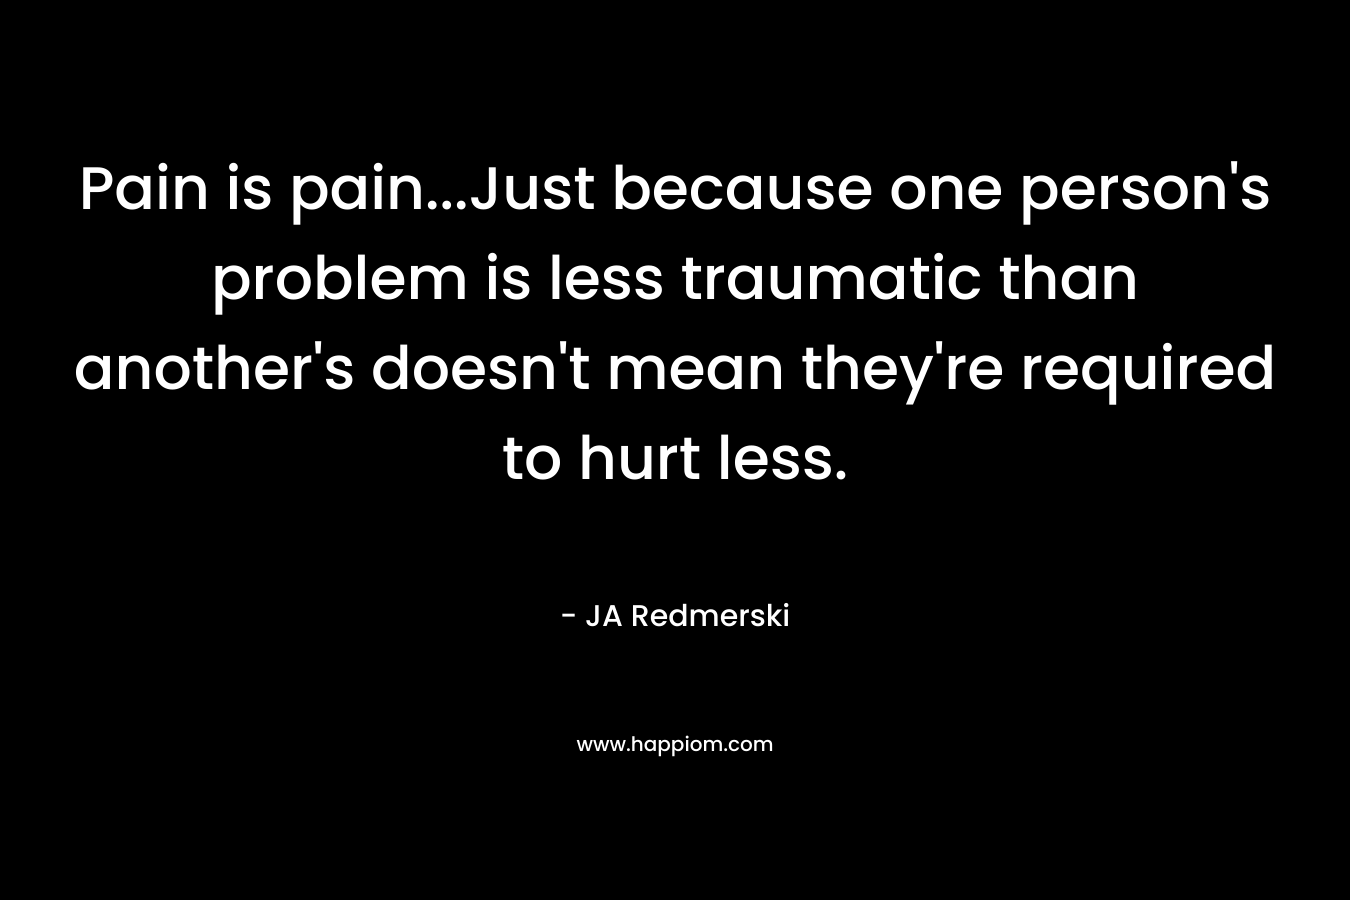 Pain is pain...Just because one person's problem is less traumatic than another's doesn't mean they're required to hurt less.